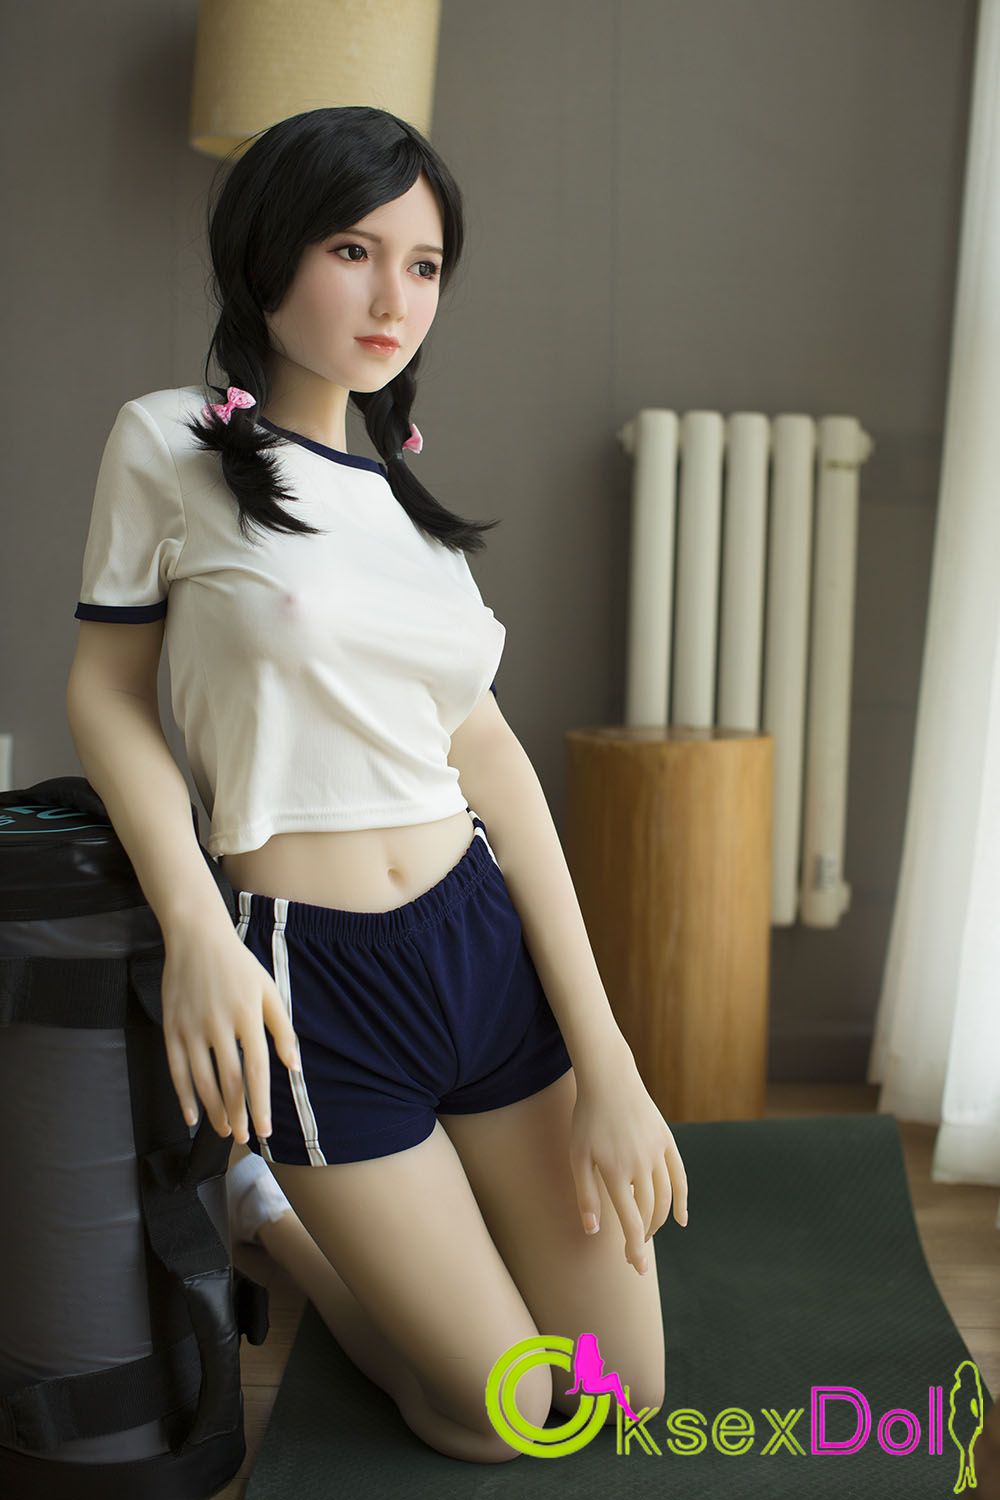 C-cup real doll Photos